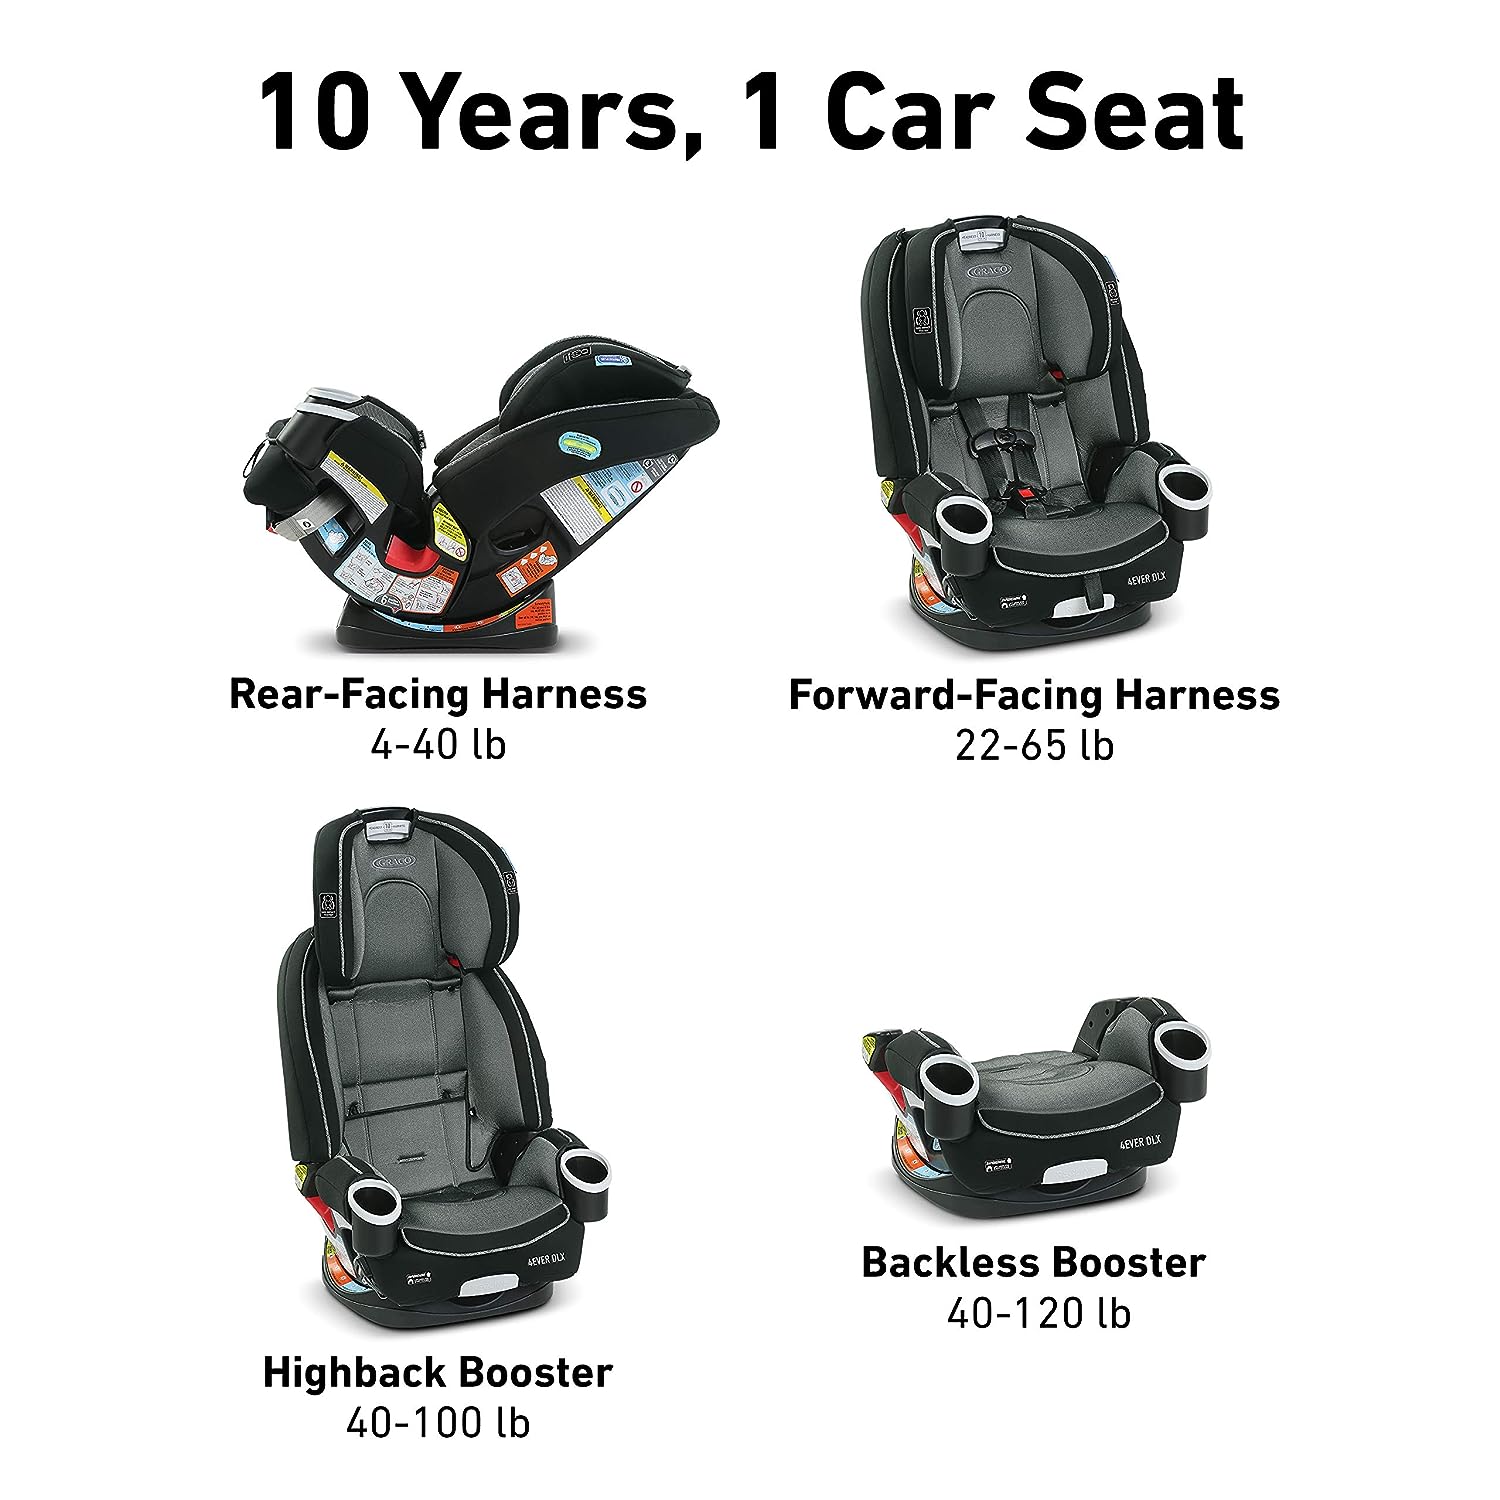 Graco 4Ever DLX 4-in-1 All-in-One Convertible Car Seat - Zagg